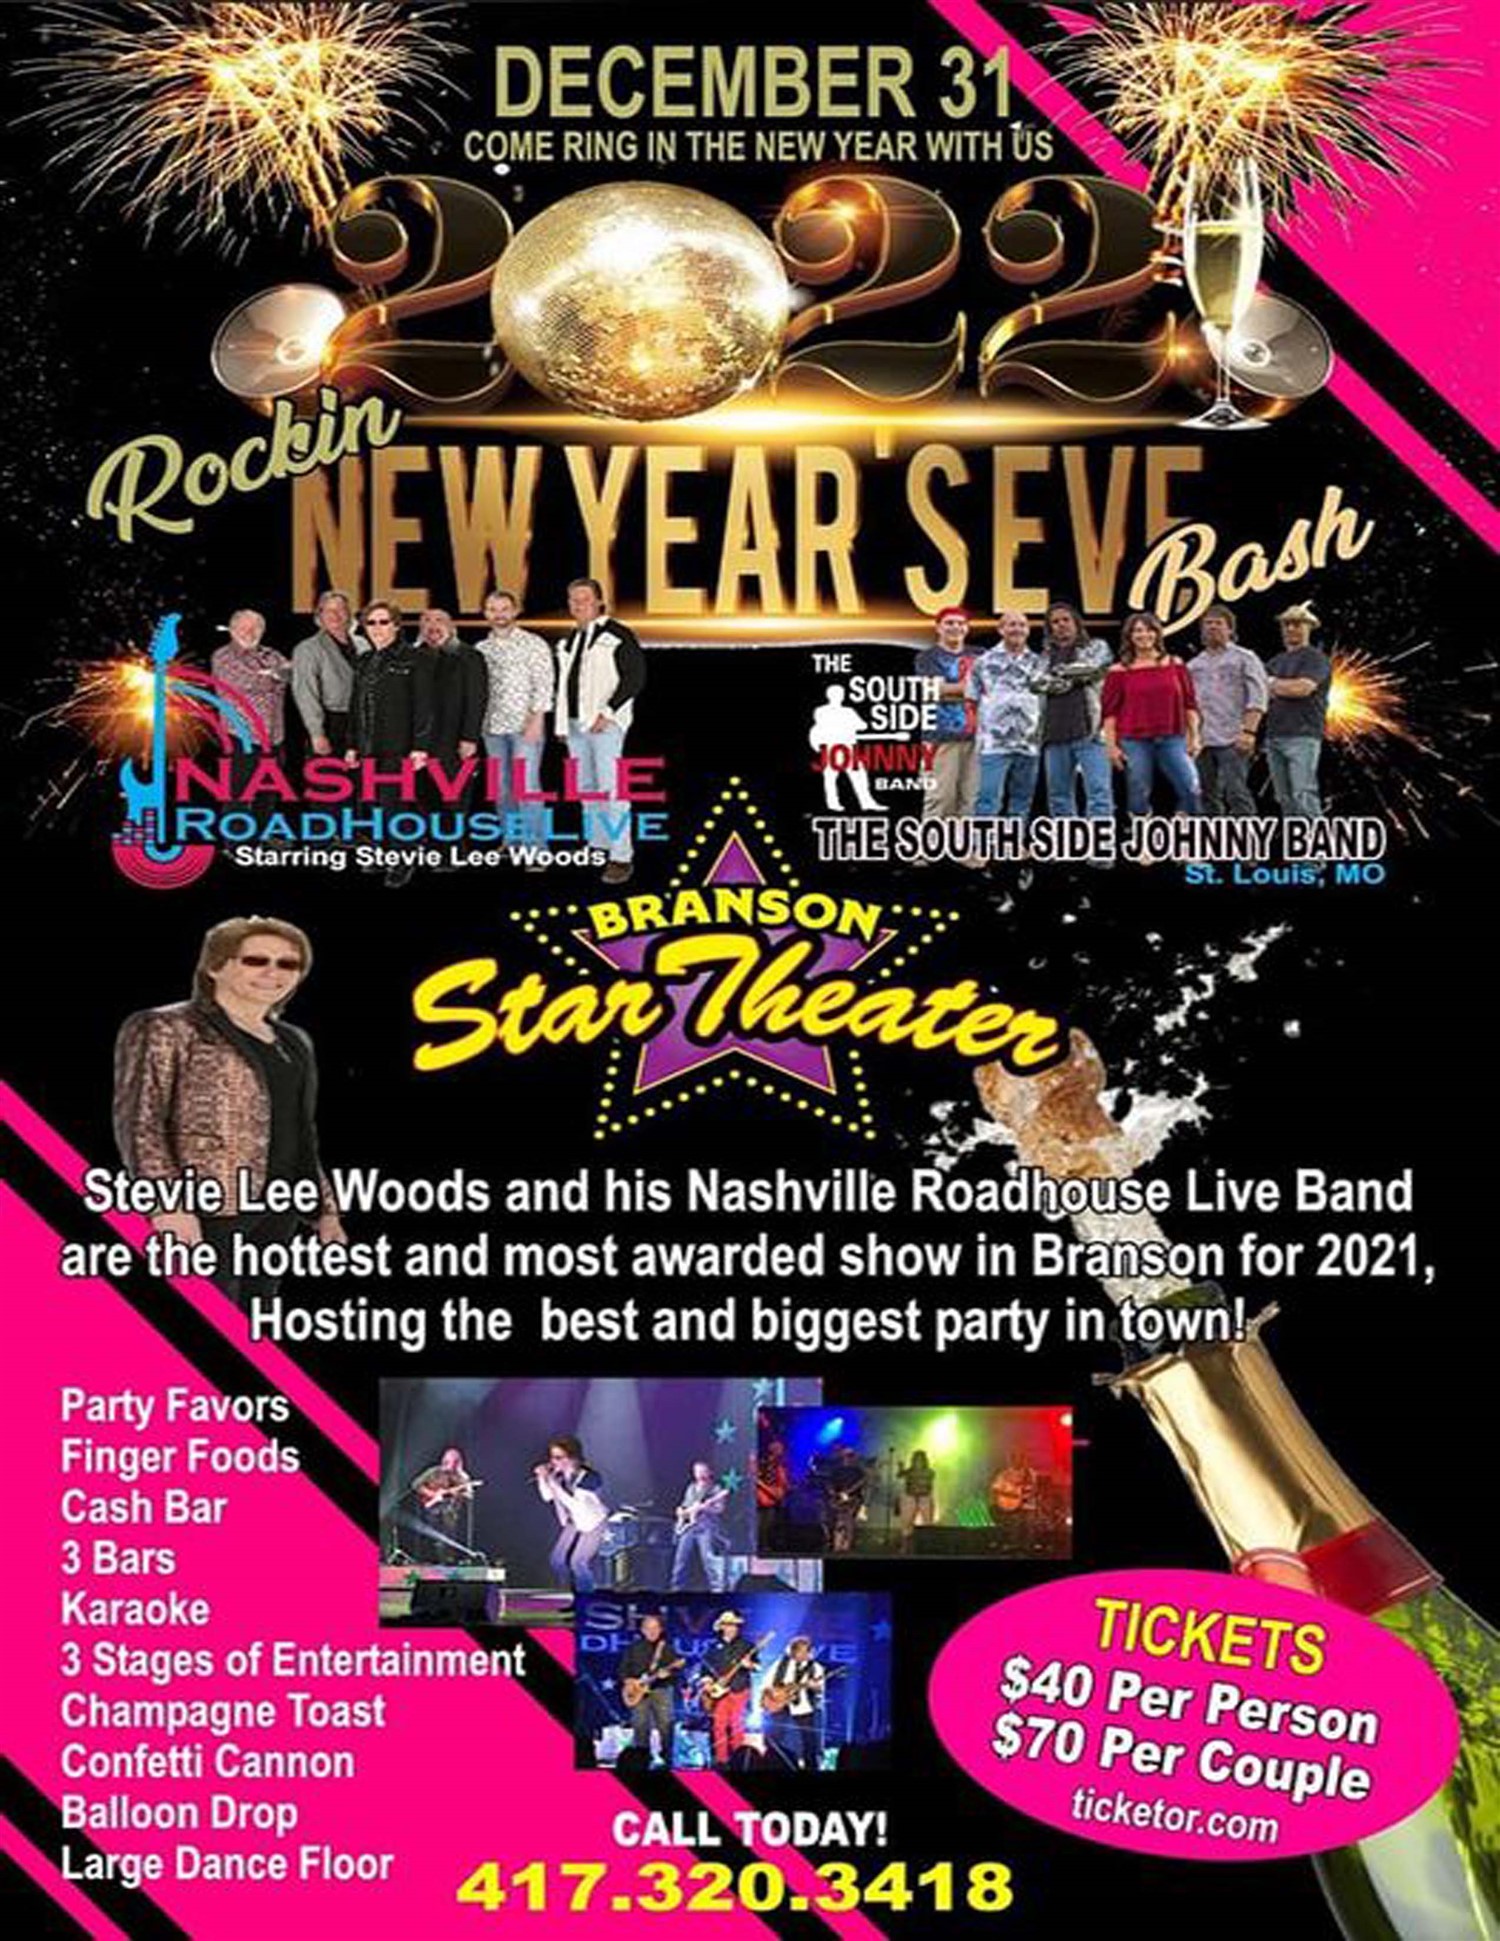 New years Eve with Nashville Roadhouse Live and SouthSide Johnny Band